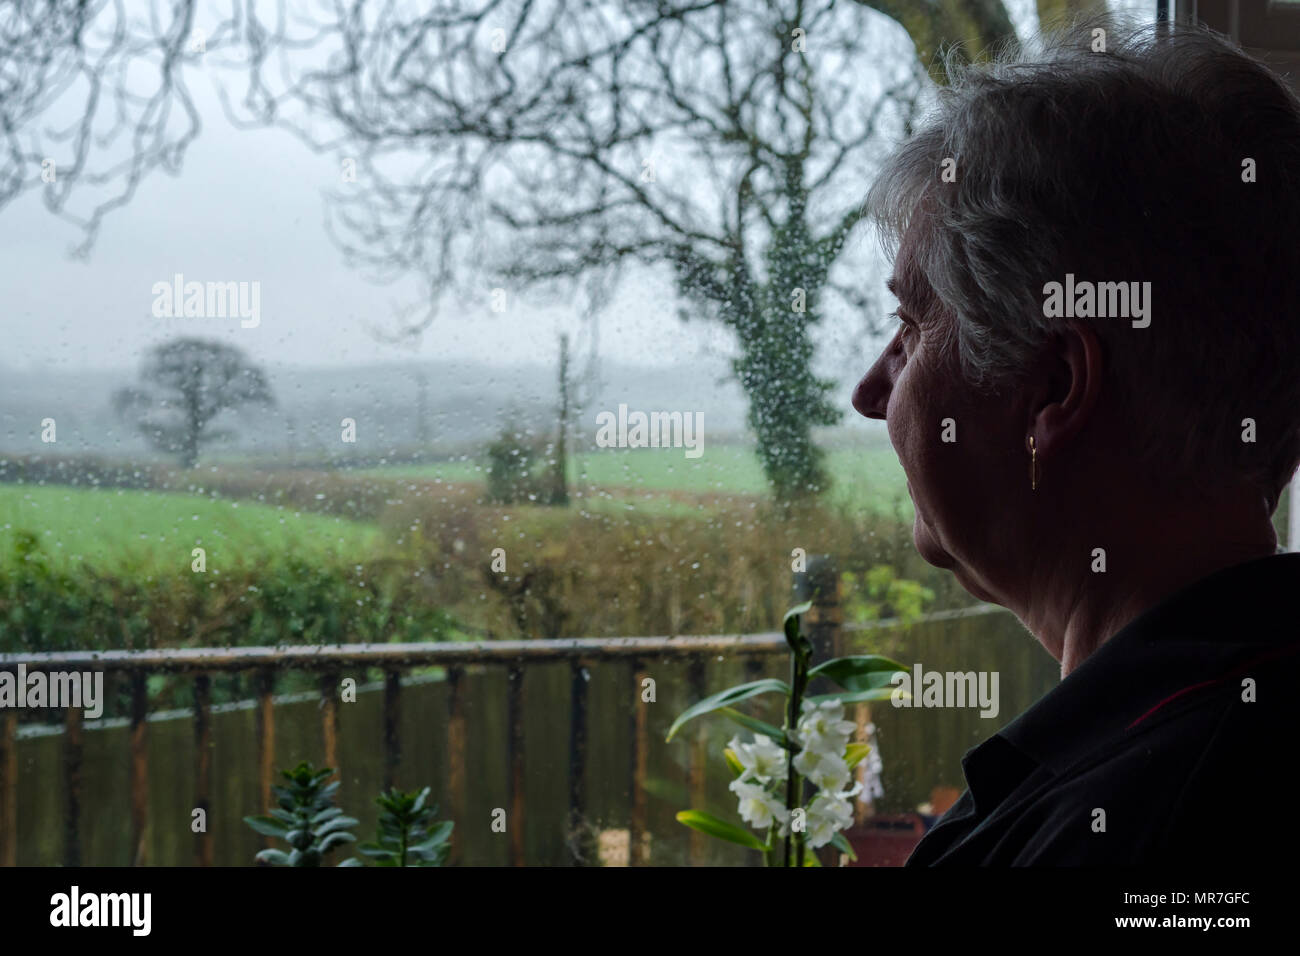 Lady looking out of the window on a rainy day Stock Photo